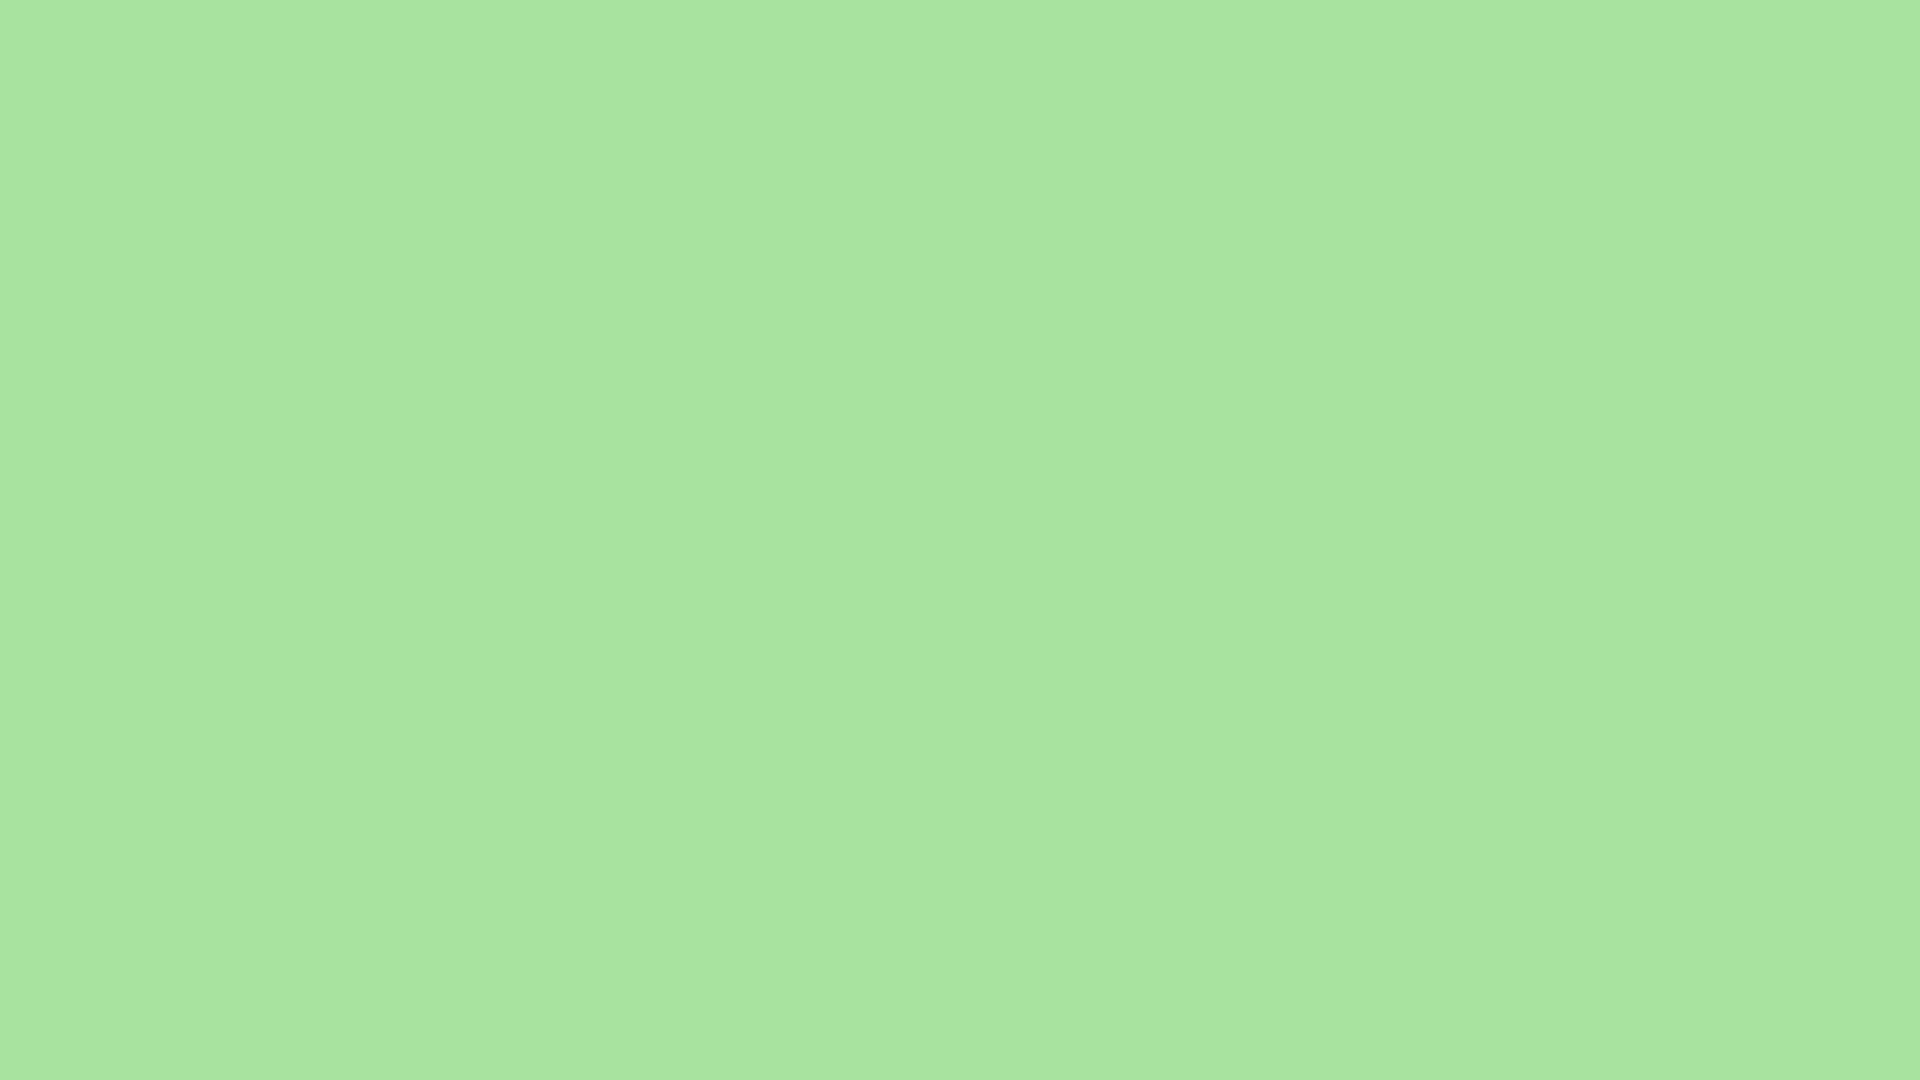 1920x1080 Granny Smith Apple Solid Color Background